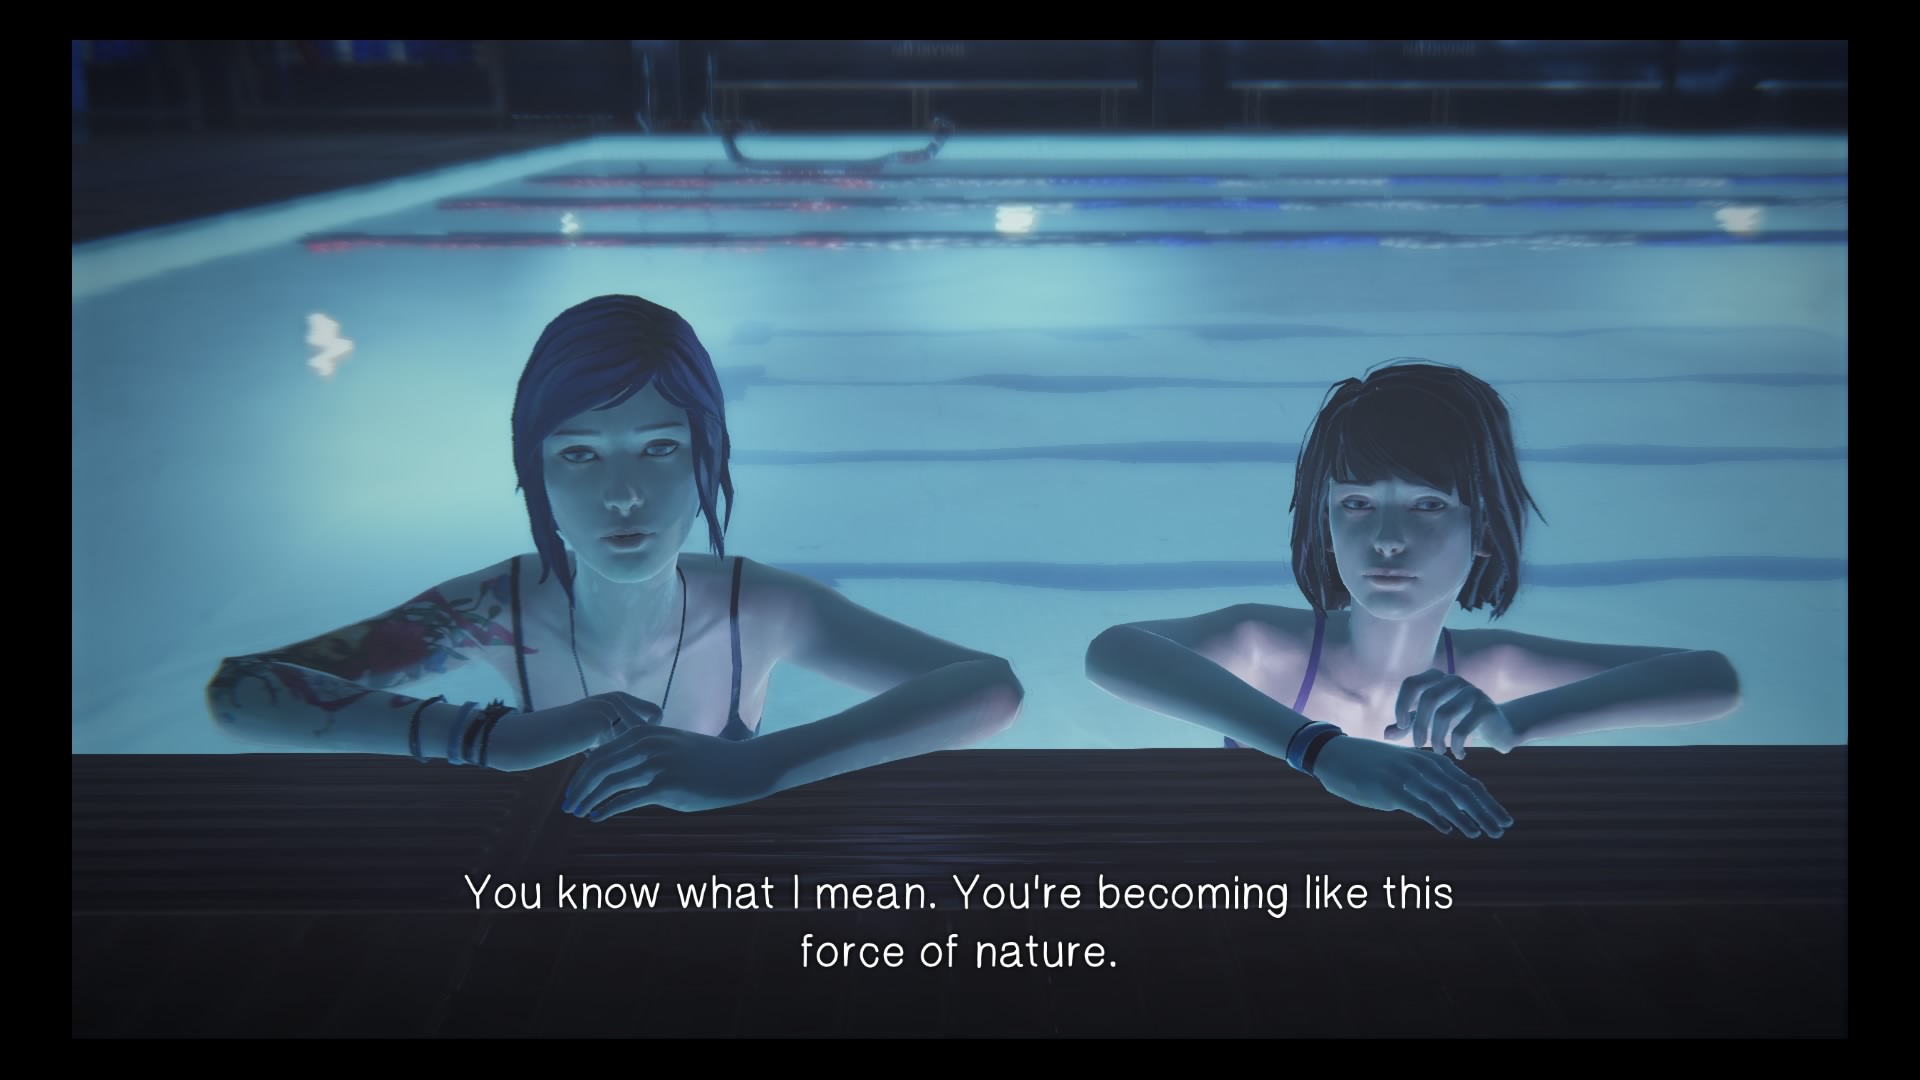 Life is Strange: Episode 3 Review Gallery